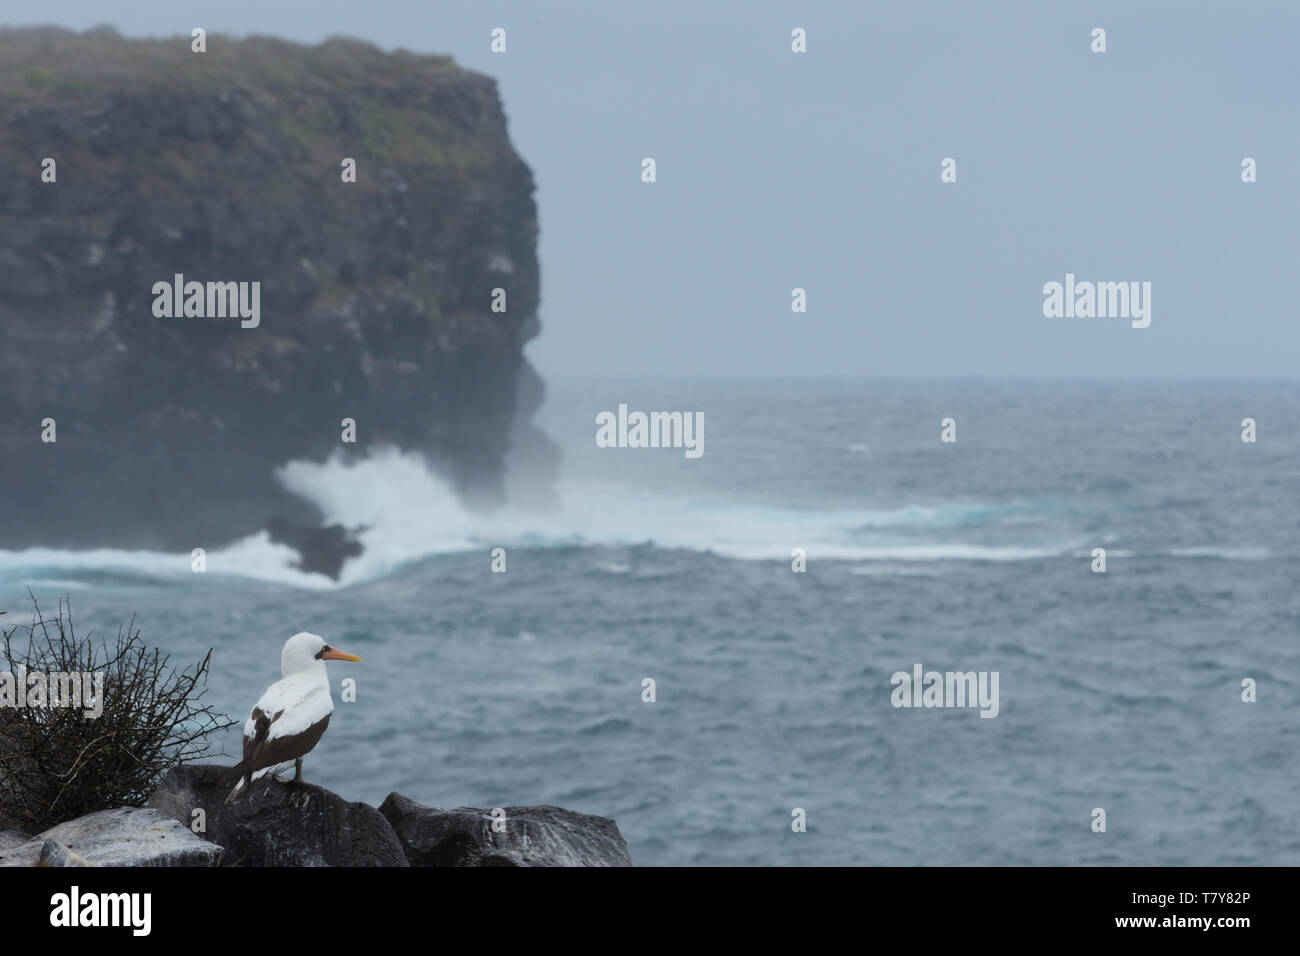 Nazcar Booby (Sula granti) on the cliff-top overlooking stormy waters on Espanola Island, Galapagos Islands Stock Photo